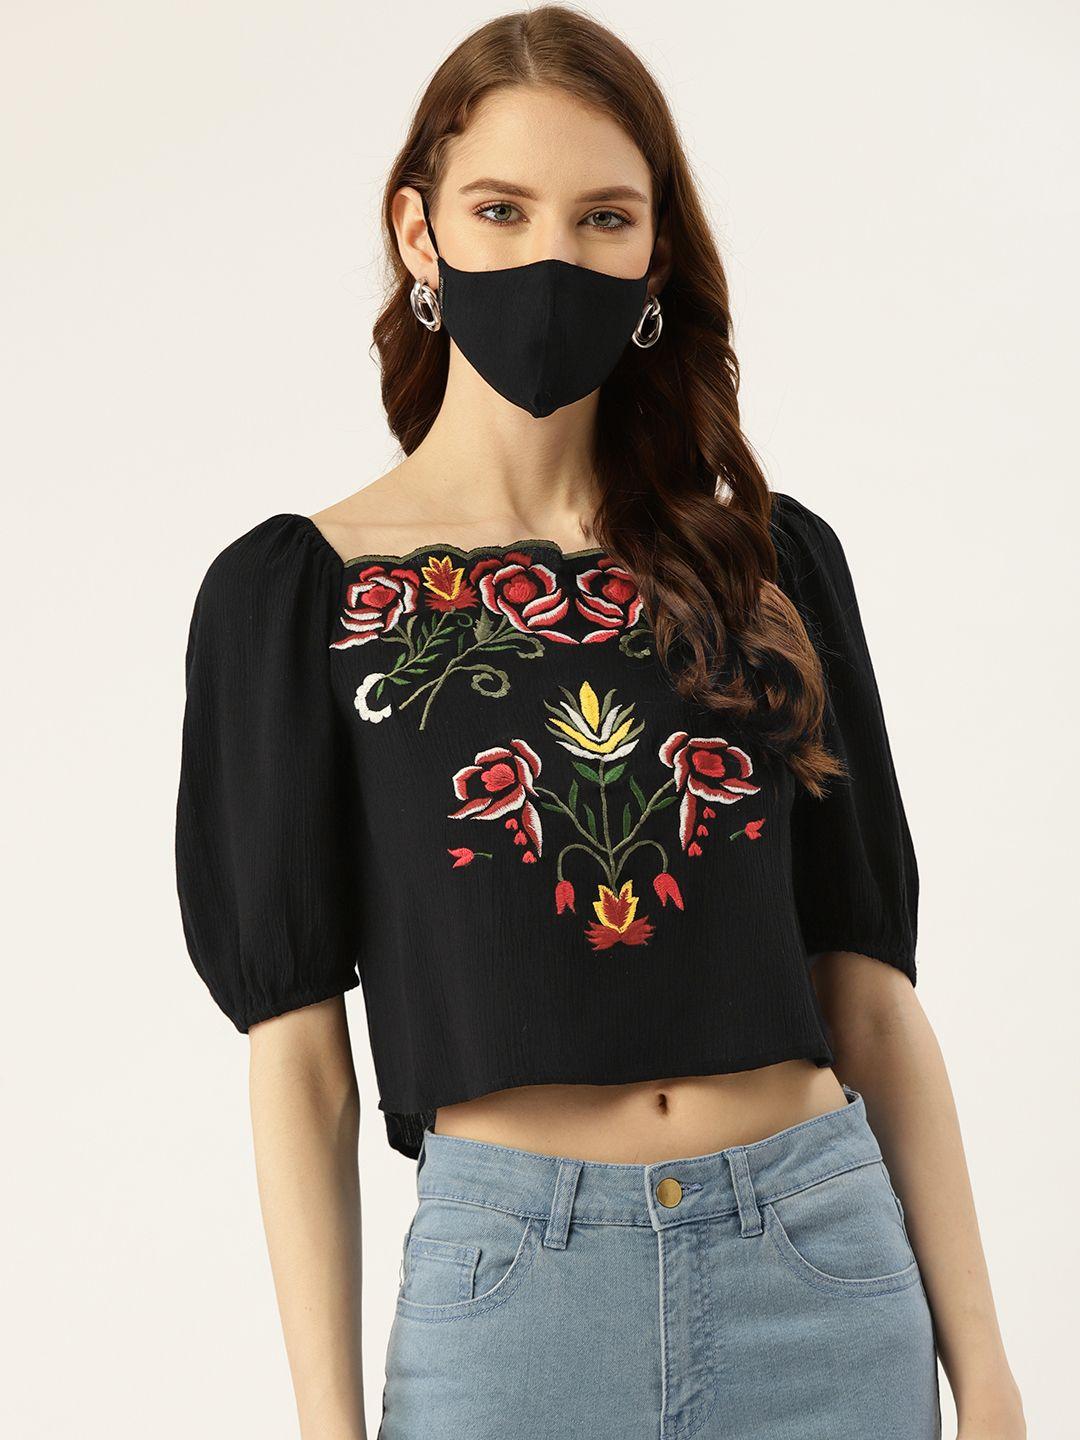 diva-walk-exclusive-women-black-embroidered-crop-top-with-matching-mask